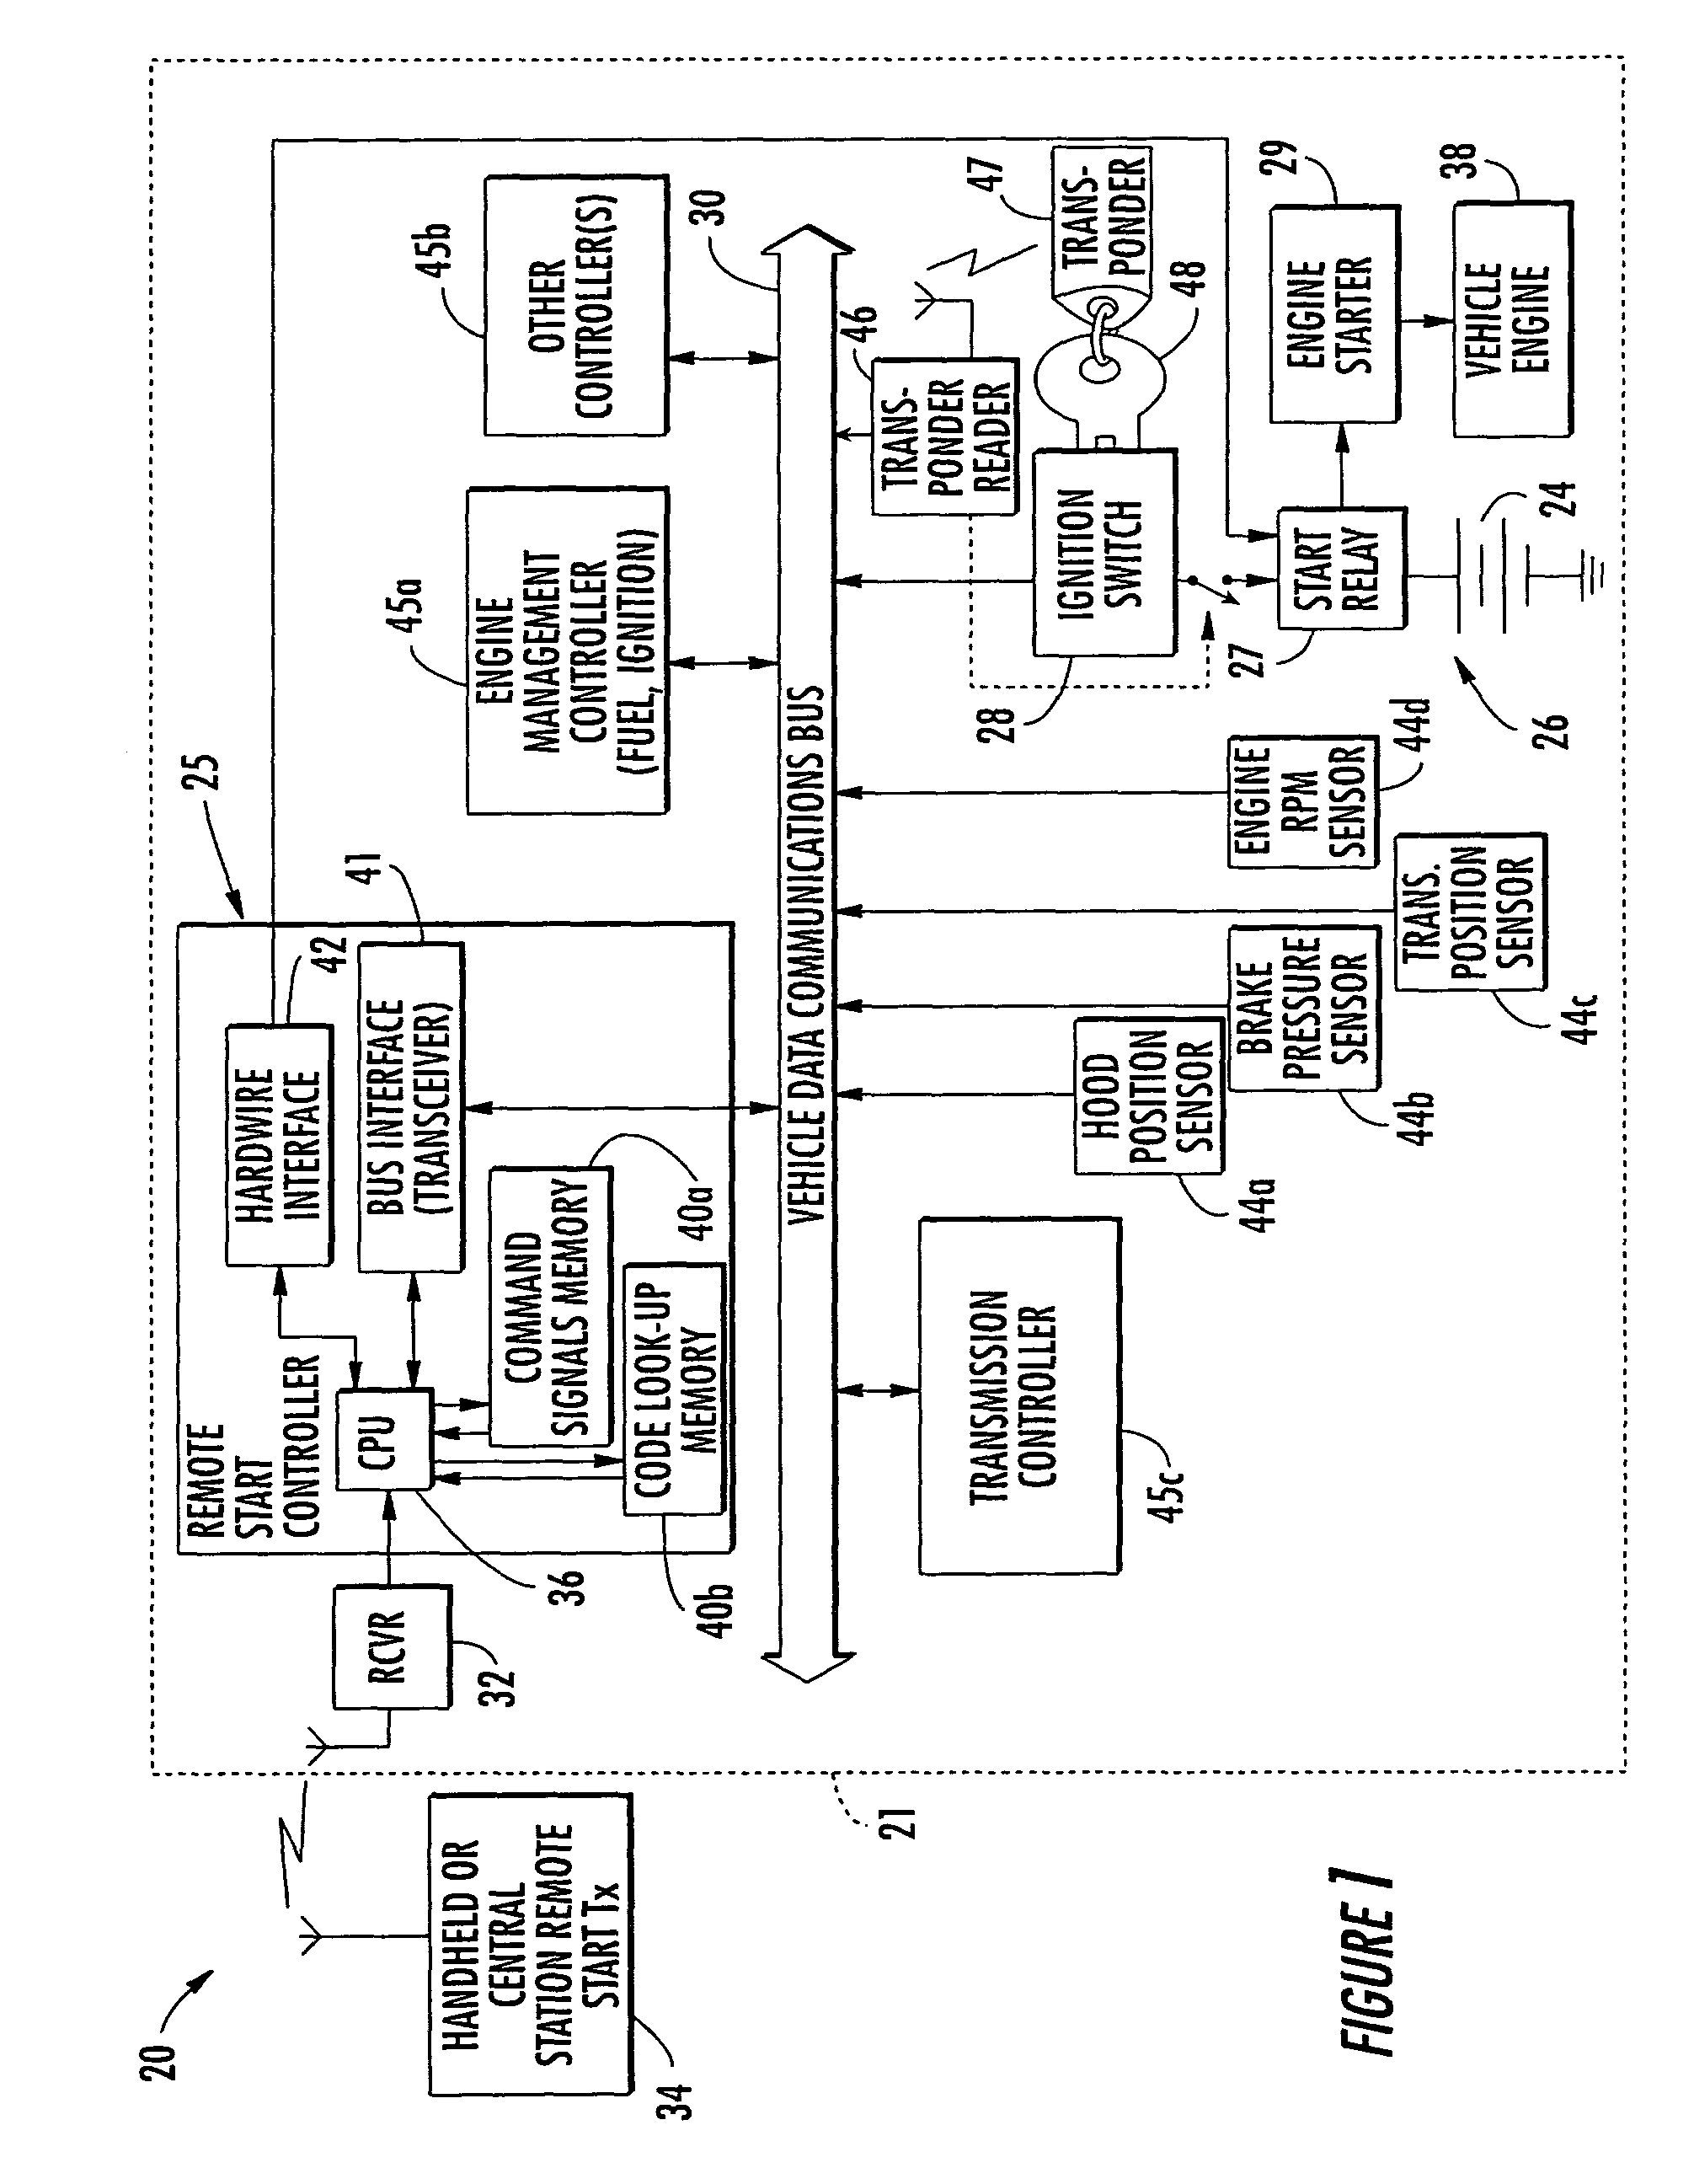 Remote start control system for starting an engine of a vehicle based on selected vehicle data carried by a data communications bus and associated methods